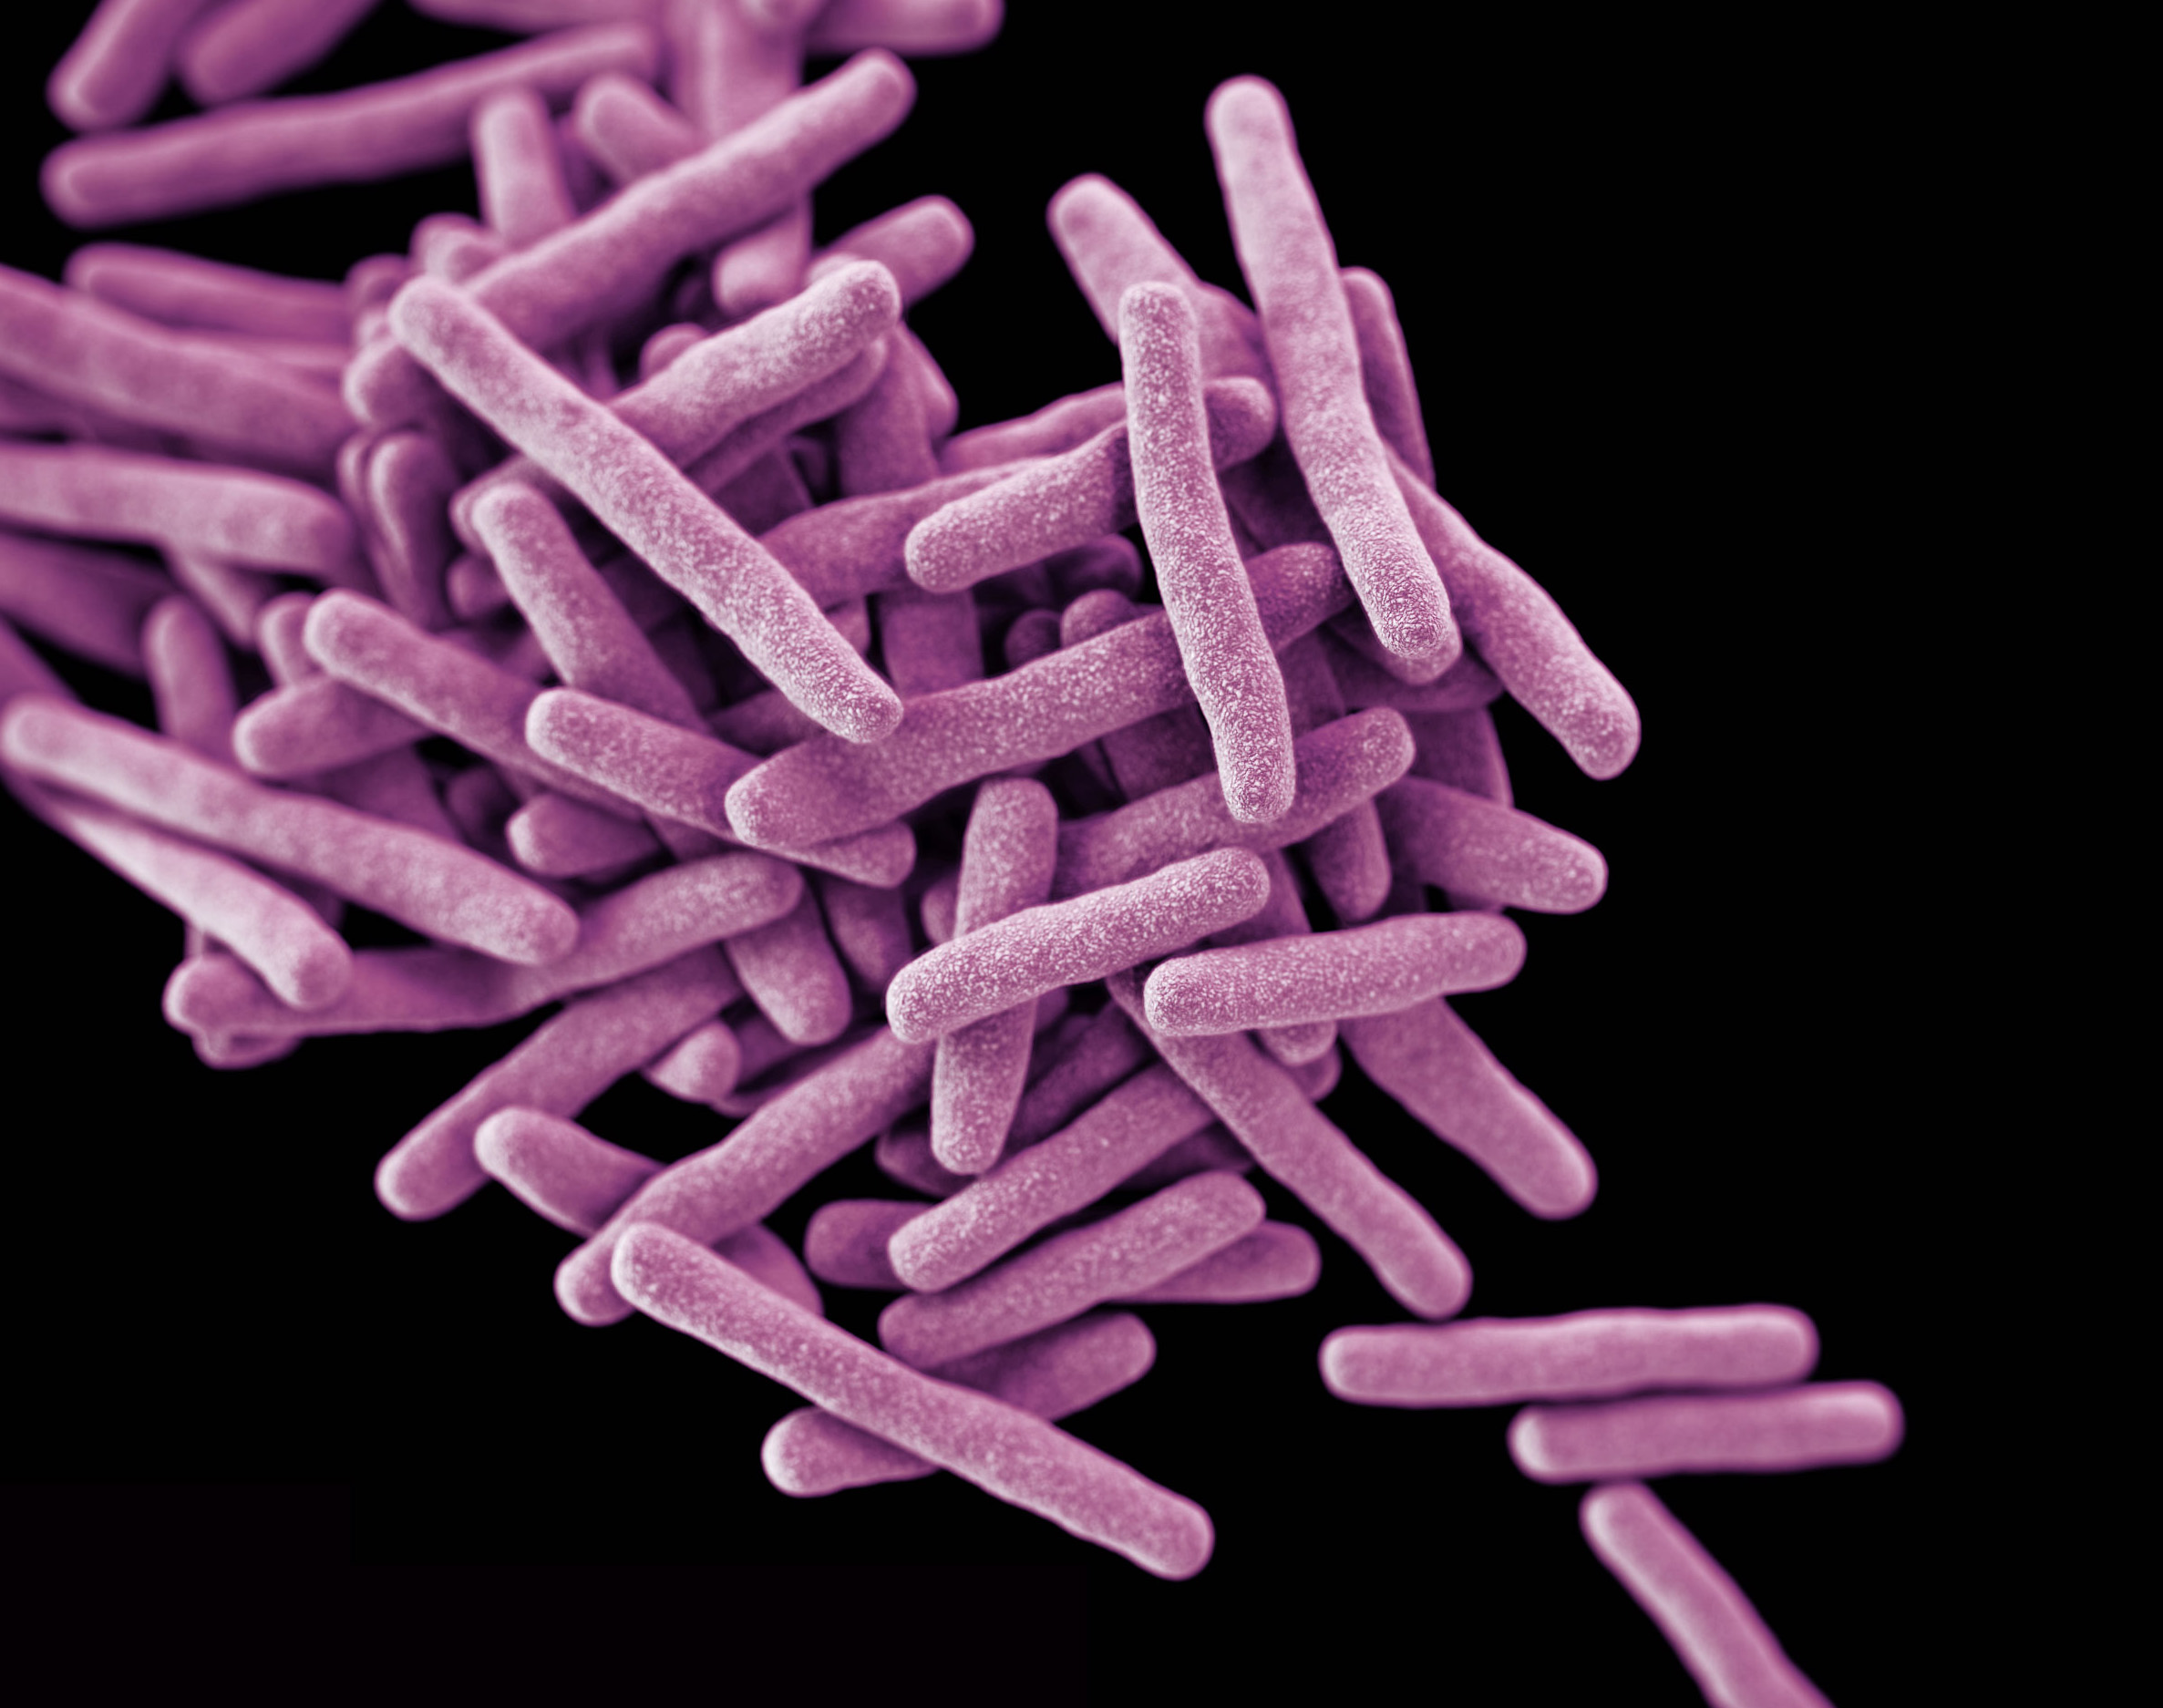 Editing The Genes Of Superbugs To Turn Off Antibiotic Resistance